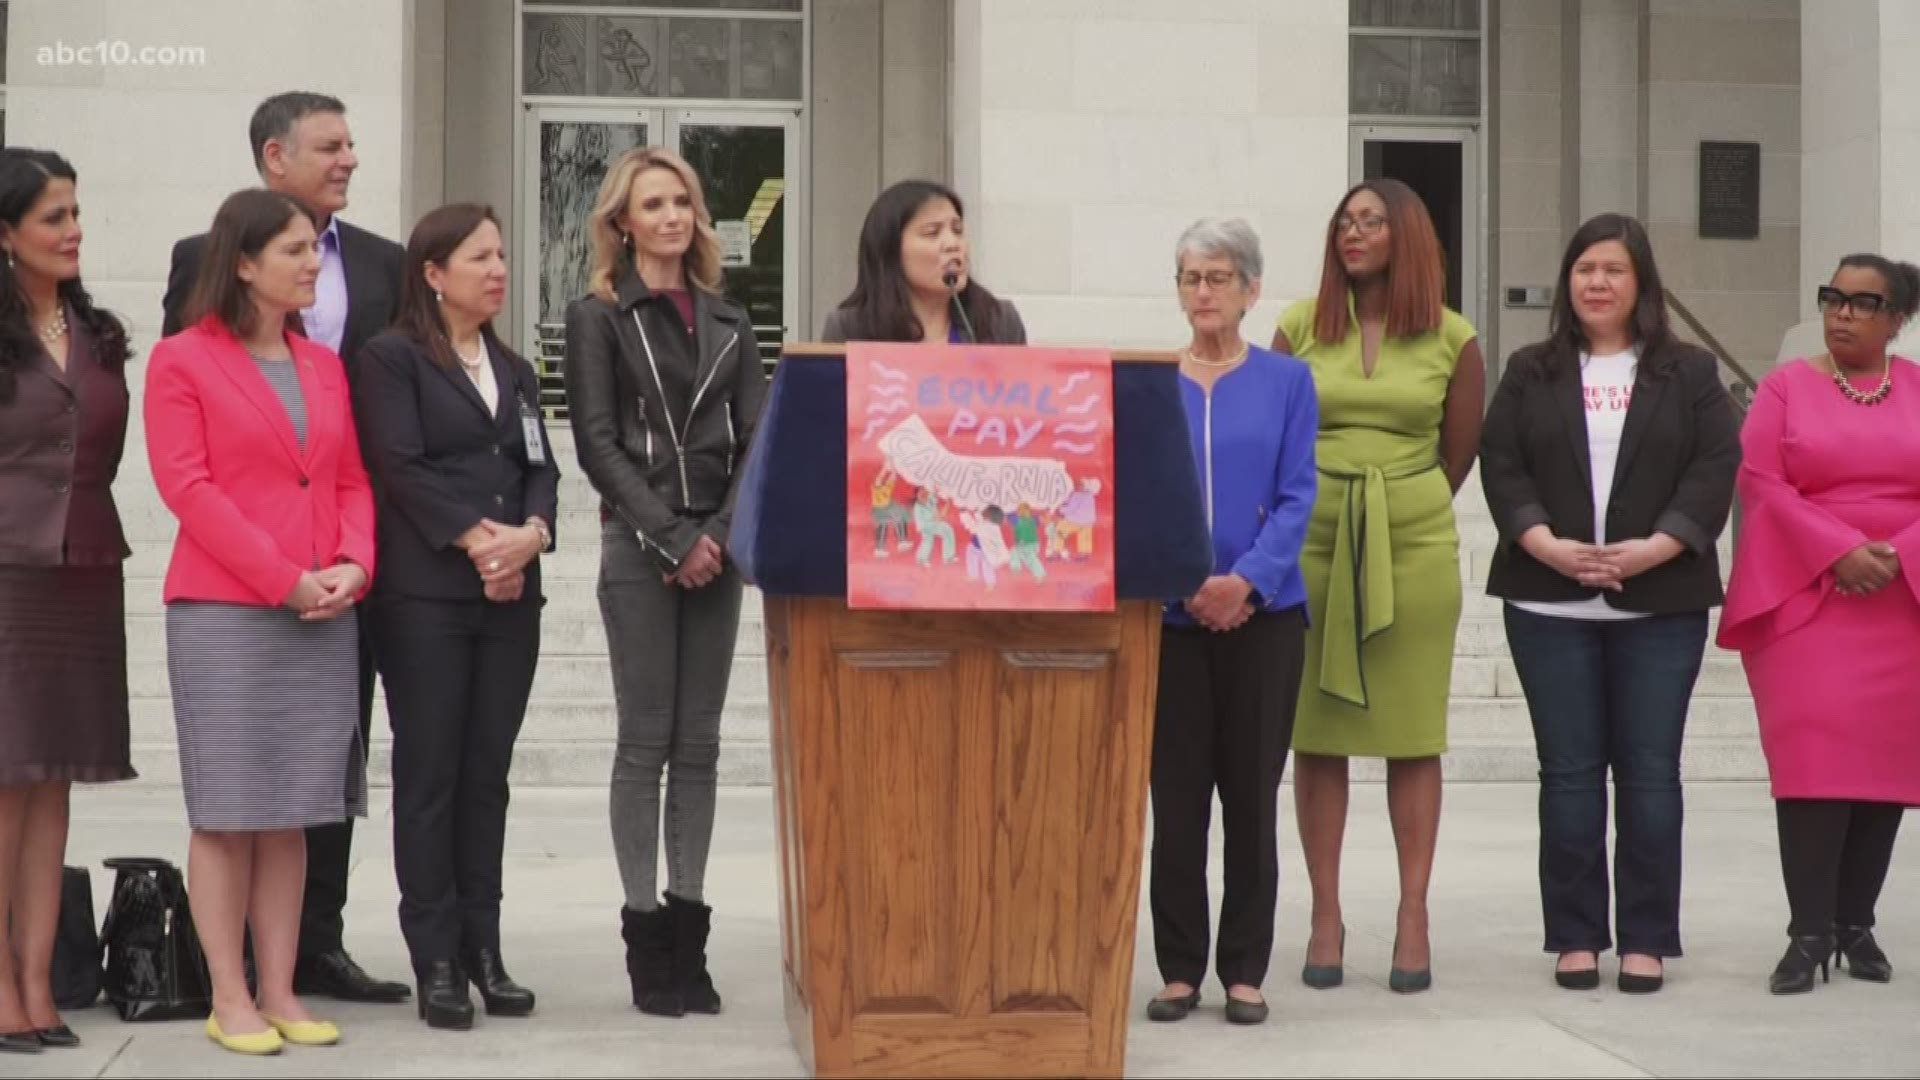 Equal Pay California is launching a tool kit for employees and employers who are looking to fix issues with pay equality. At least 13 companies like Airbnb and AT&T have already taken pledges associated with the tool kit to support pay equality.